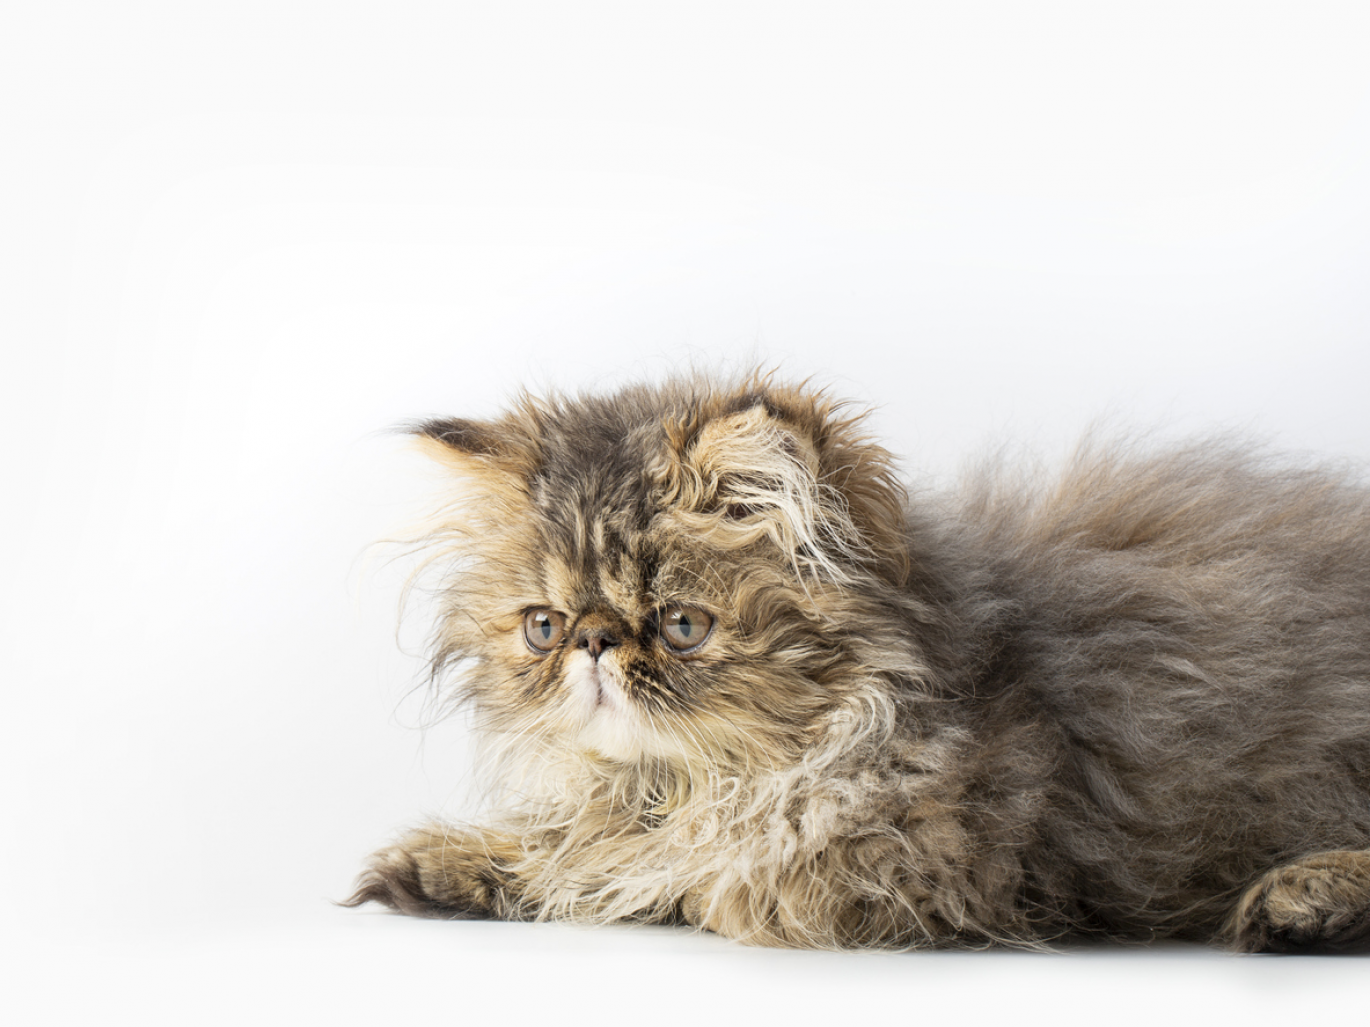 8 cat breeds and common health problems Reader's Digest